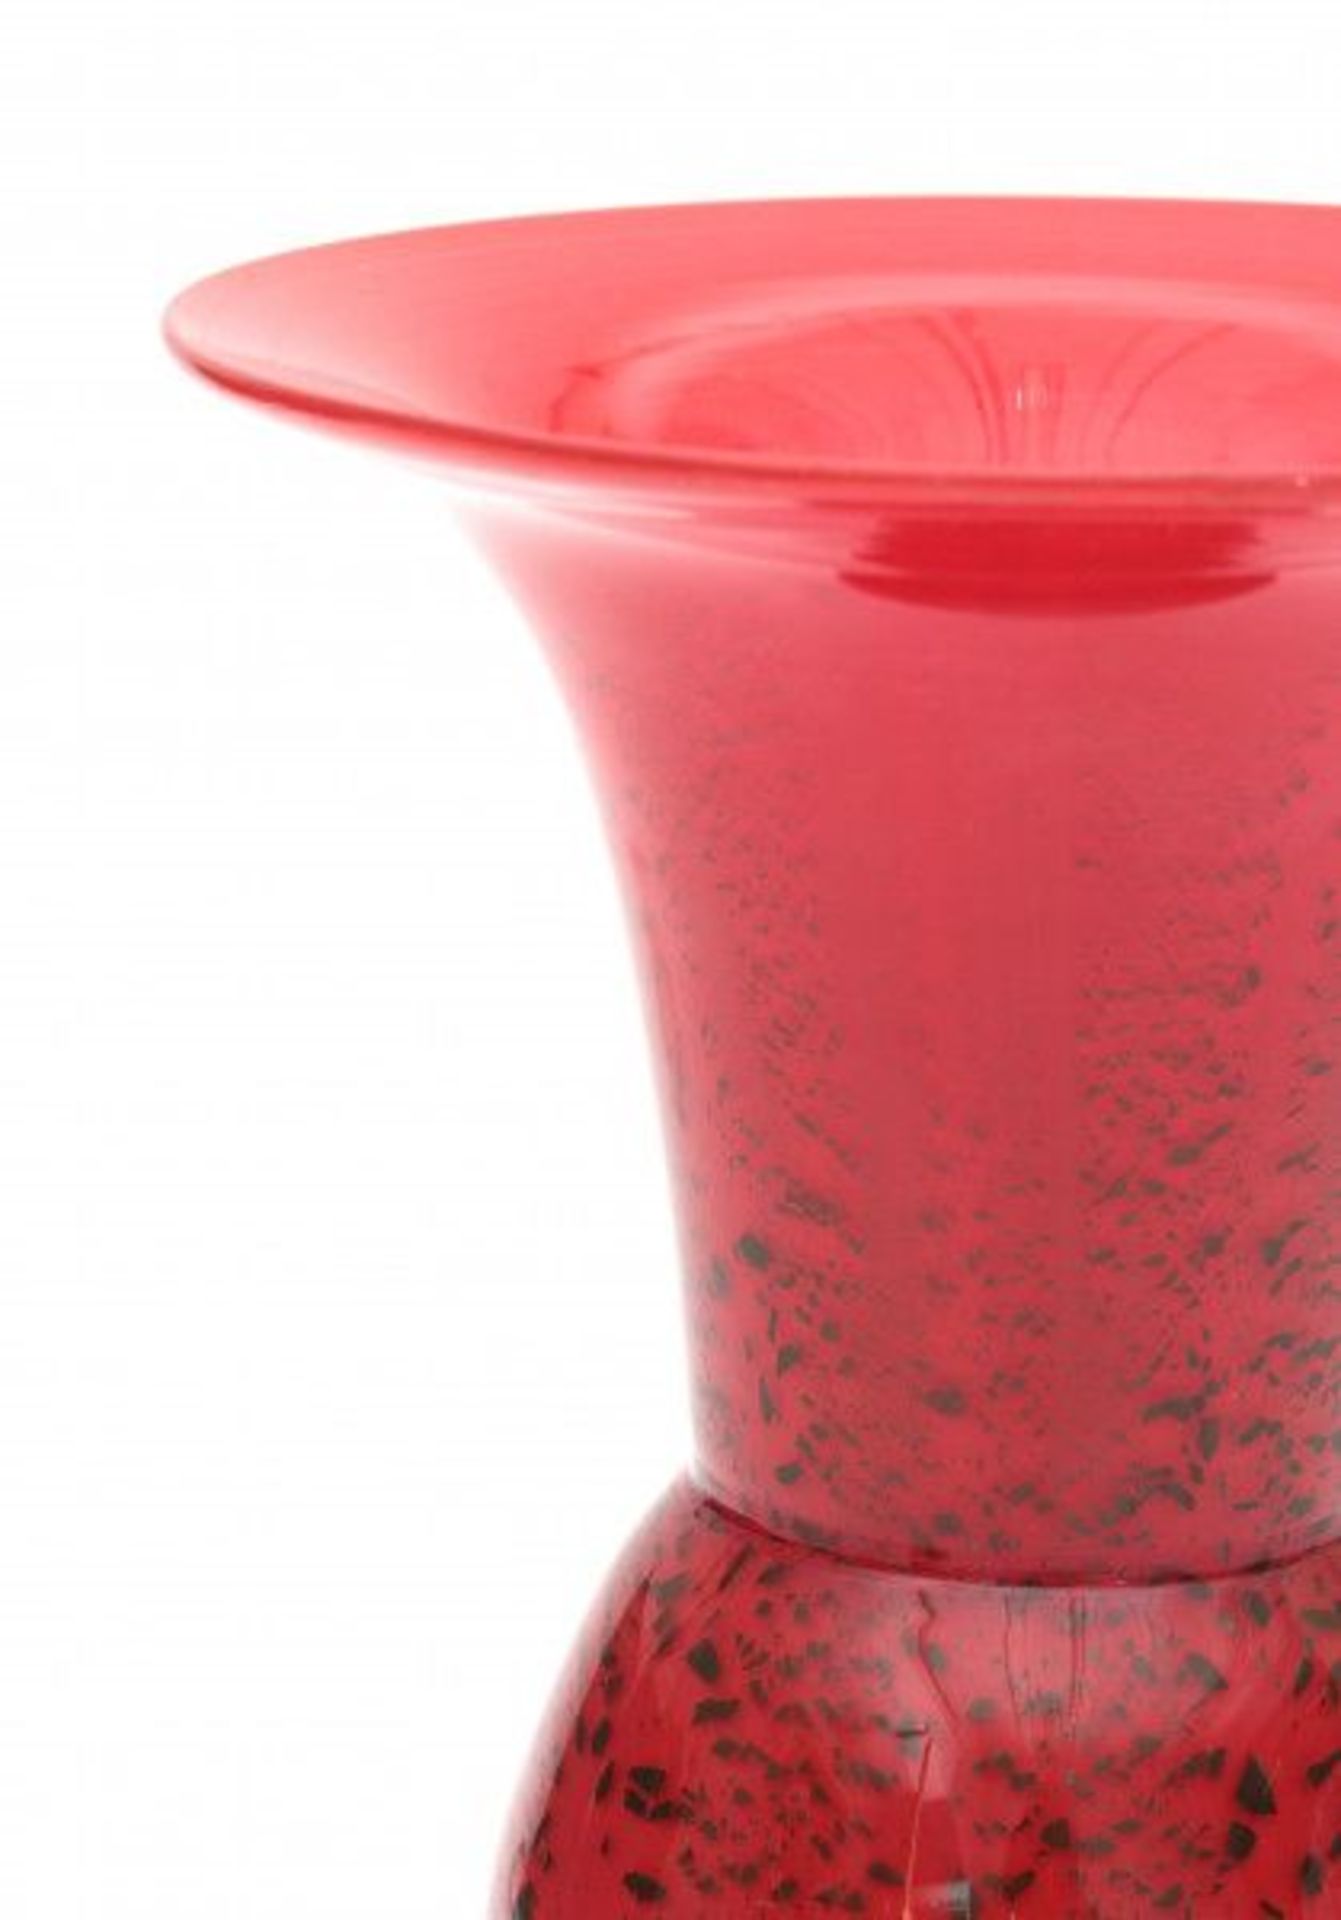 WMFA red glass 'Ikora' vase with black inclusions, 1930.23,5 cm. h.